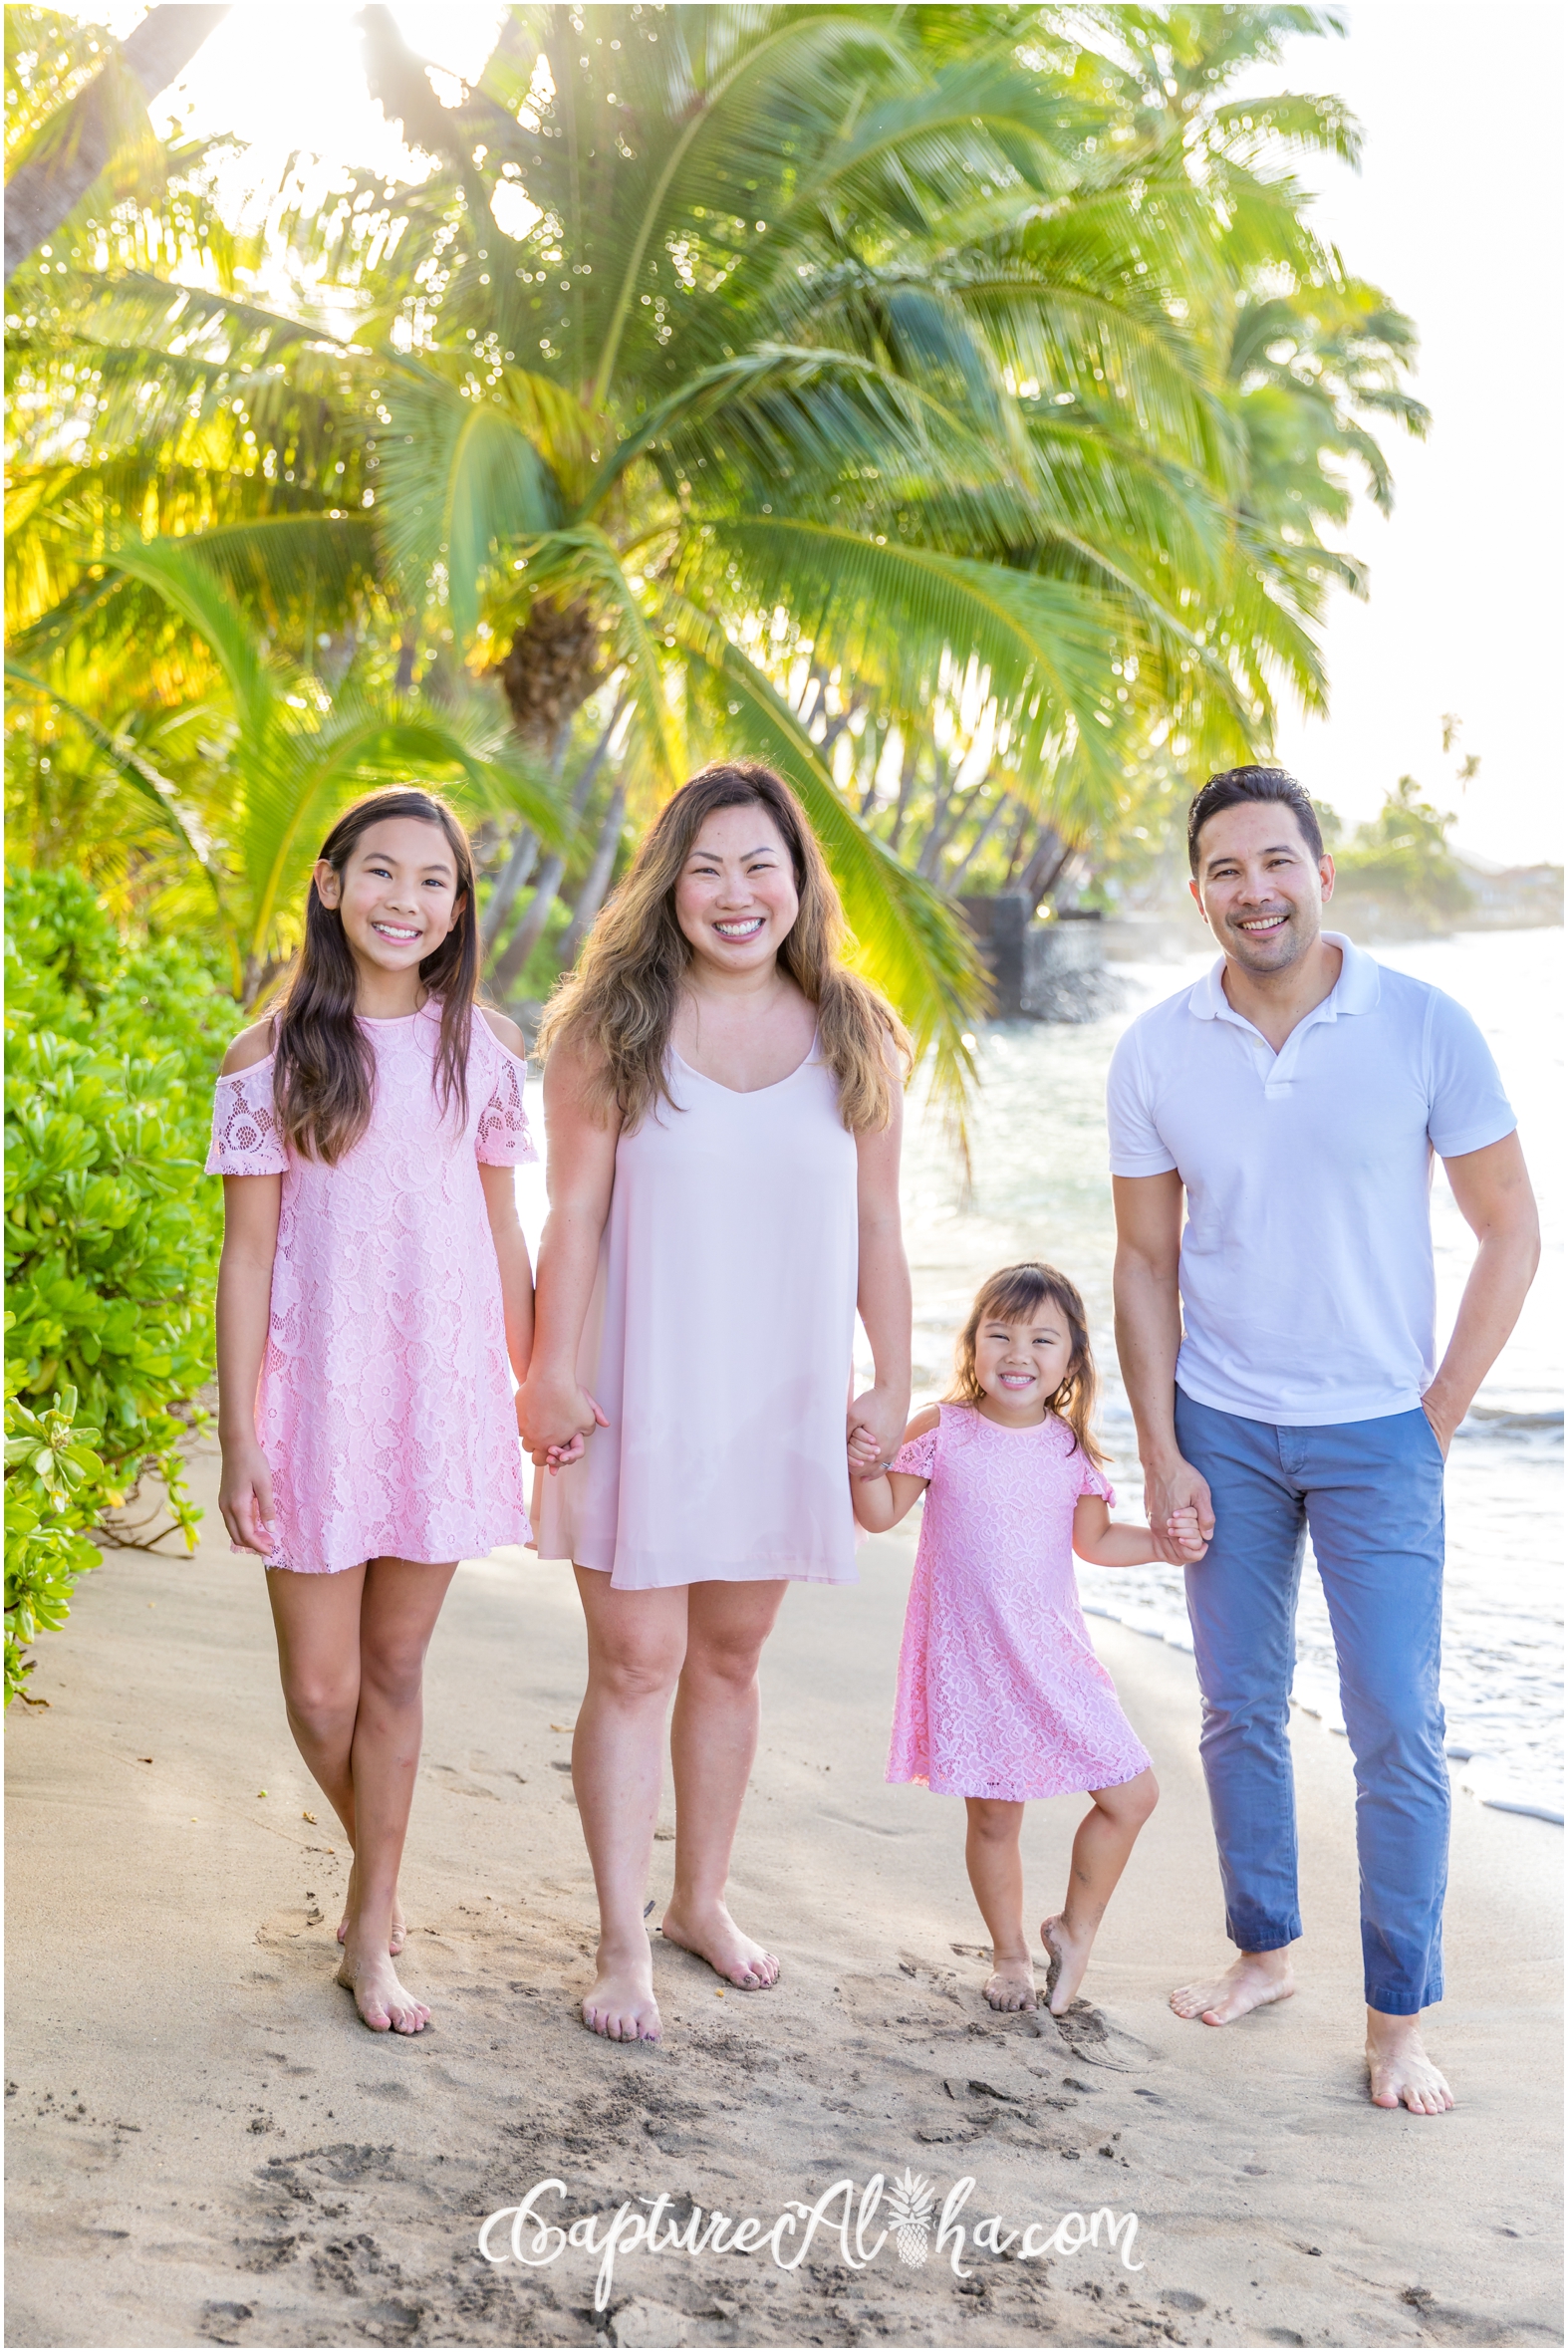 Maui Family Photography at Baby Beach in the Morning